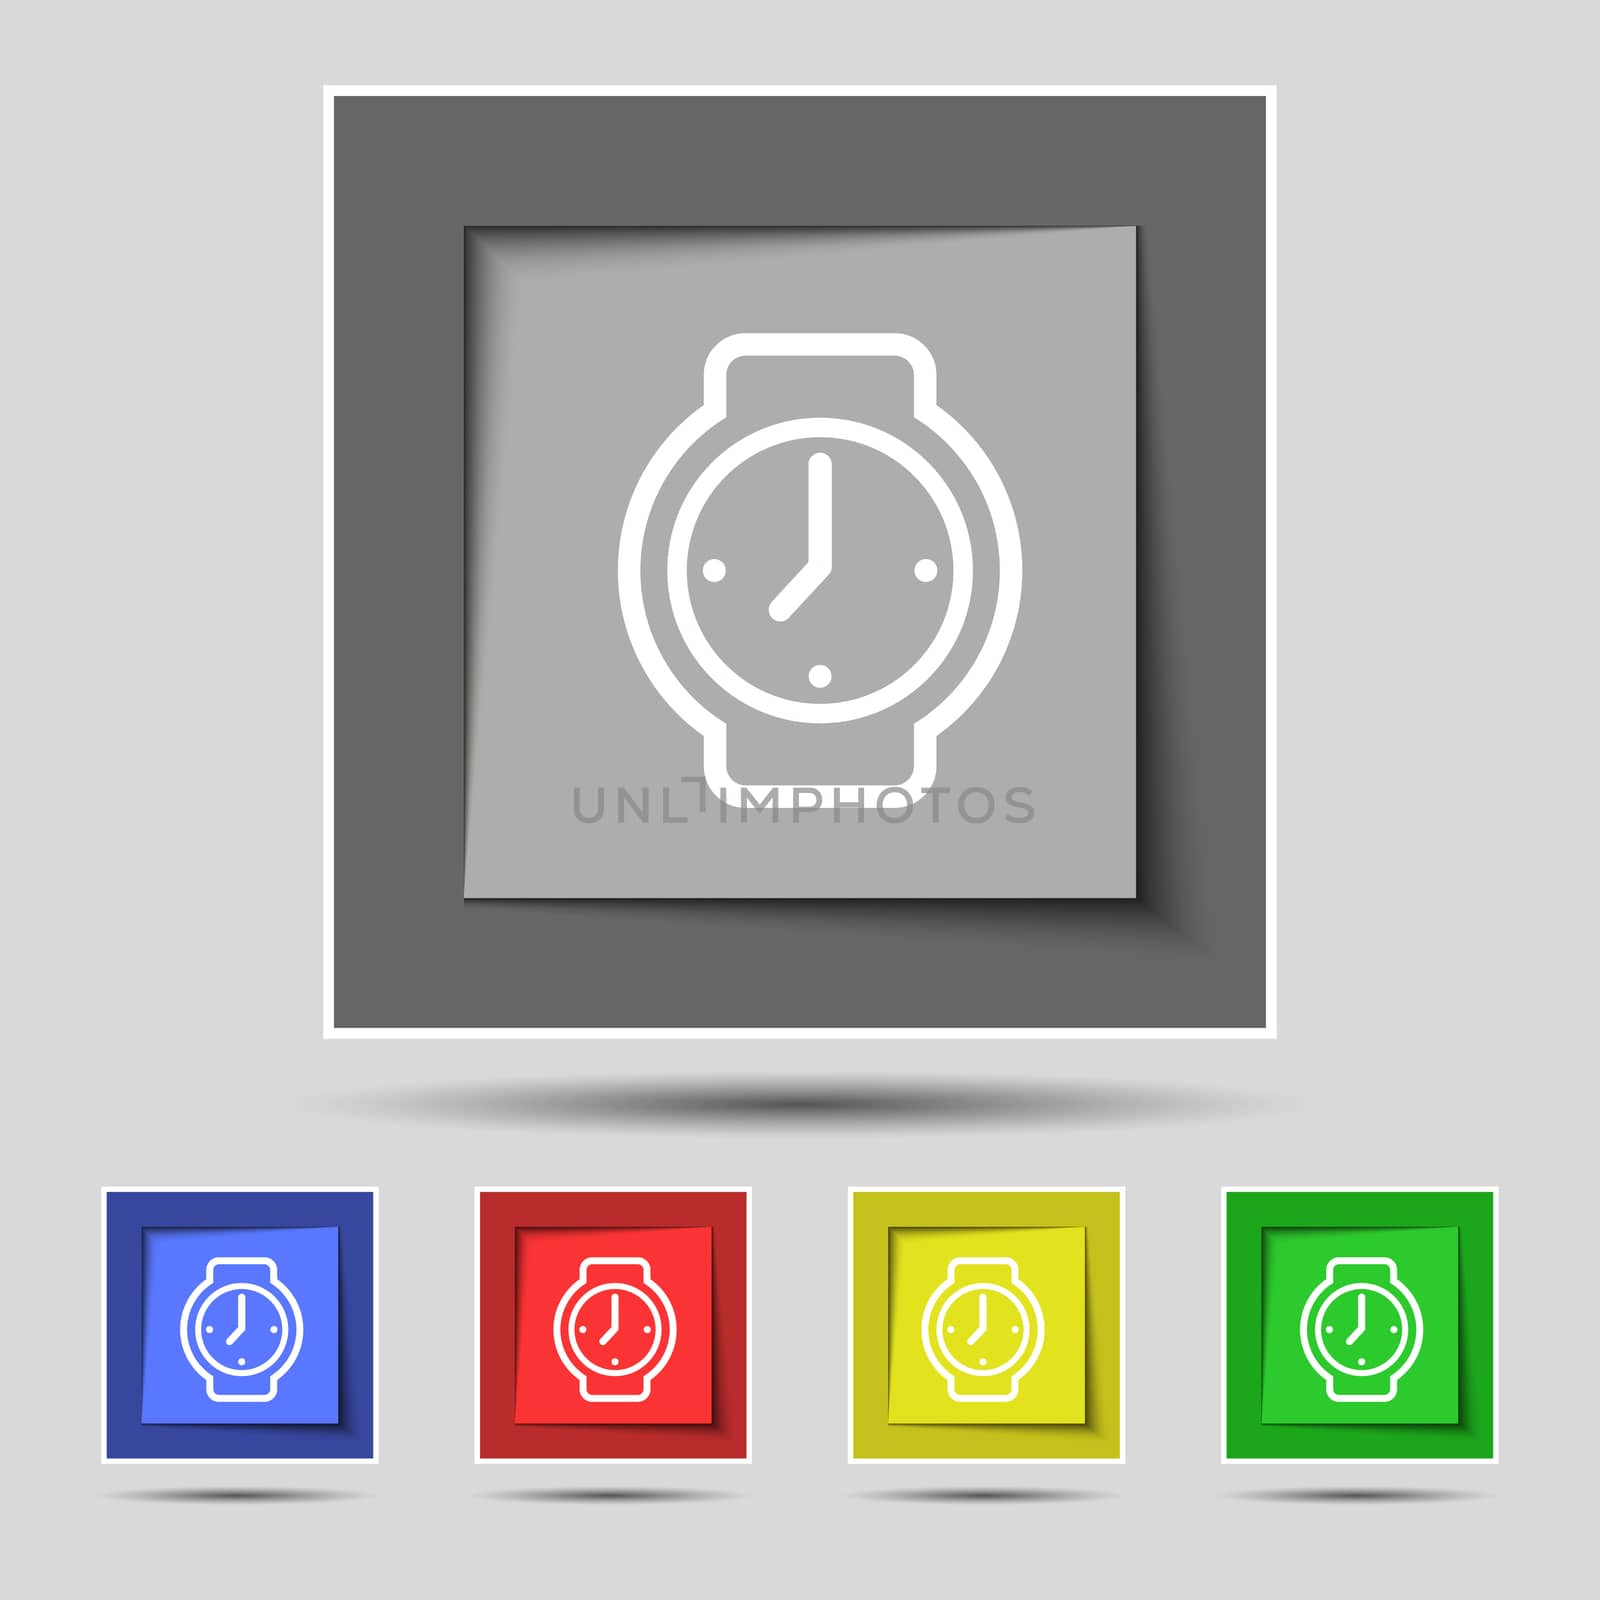 watches icon sign on original five colored buttons. illustration